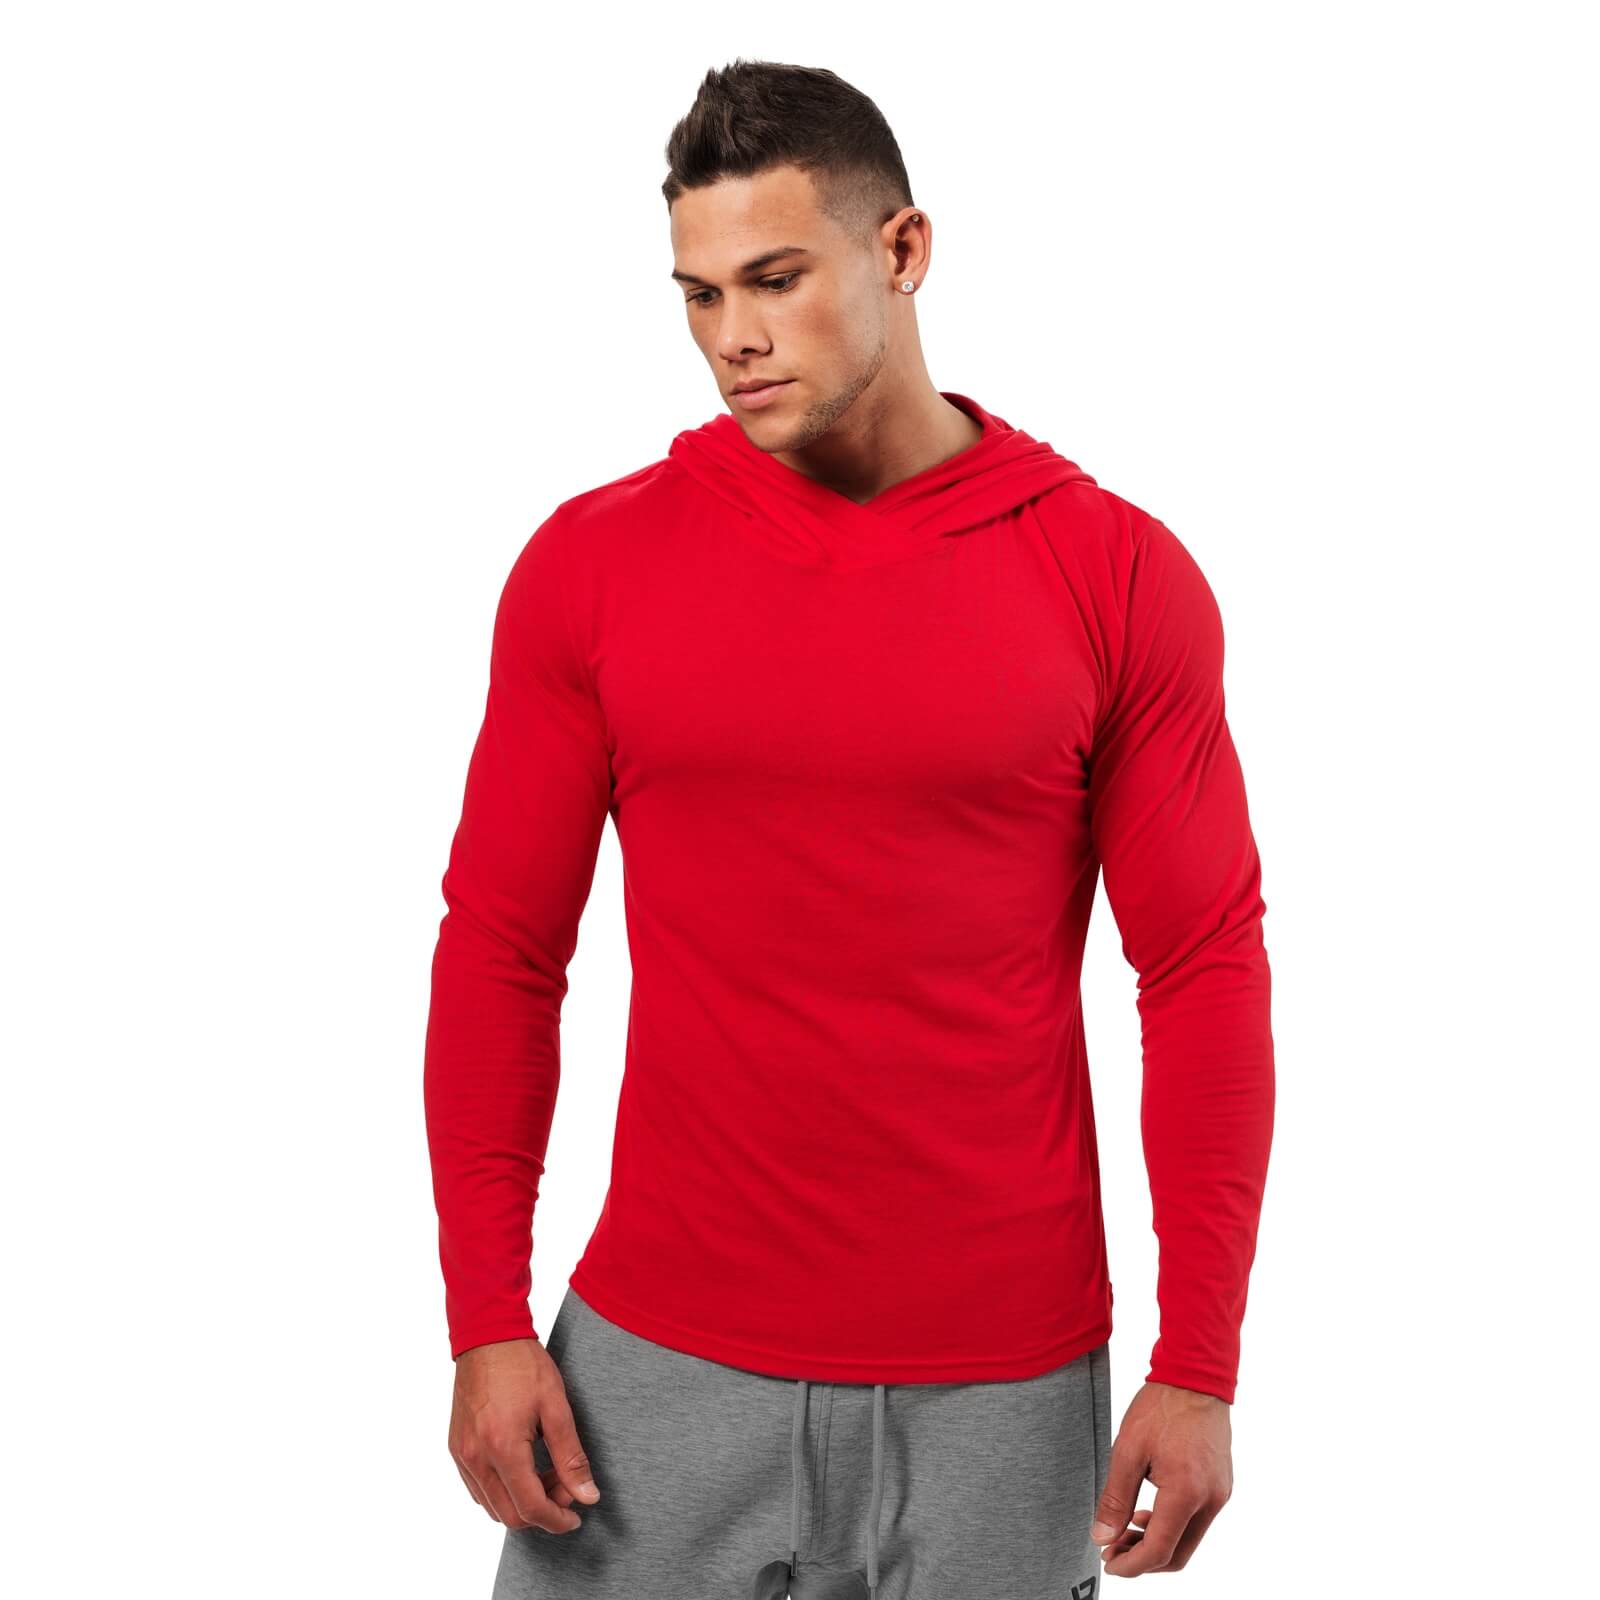 Mens Soft Hoodie, bright red, Better Bodies